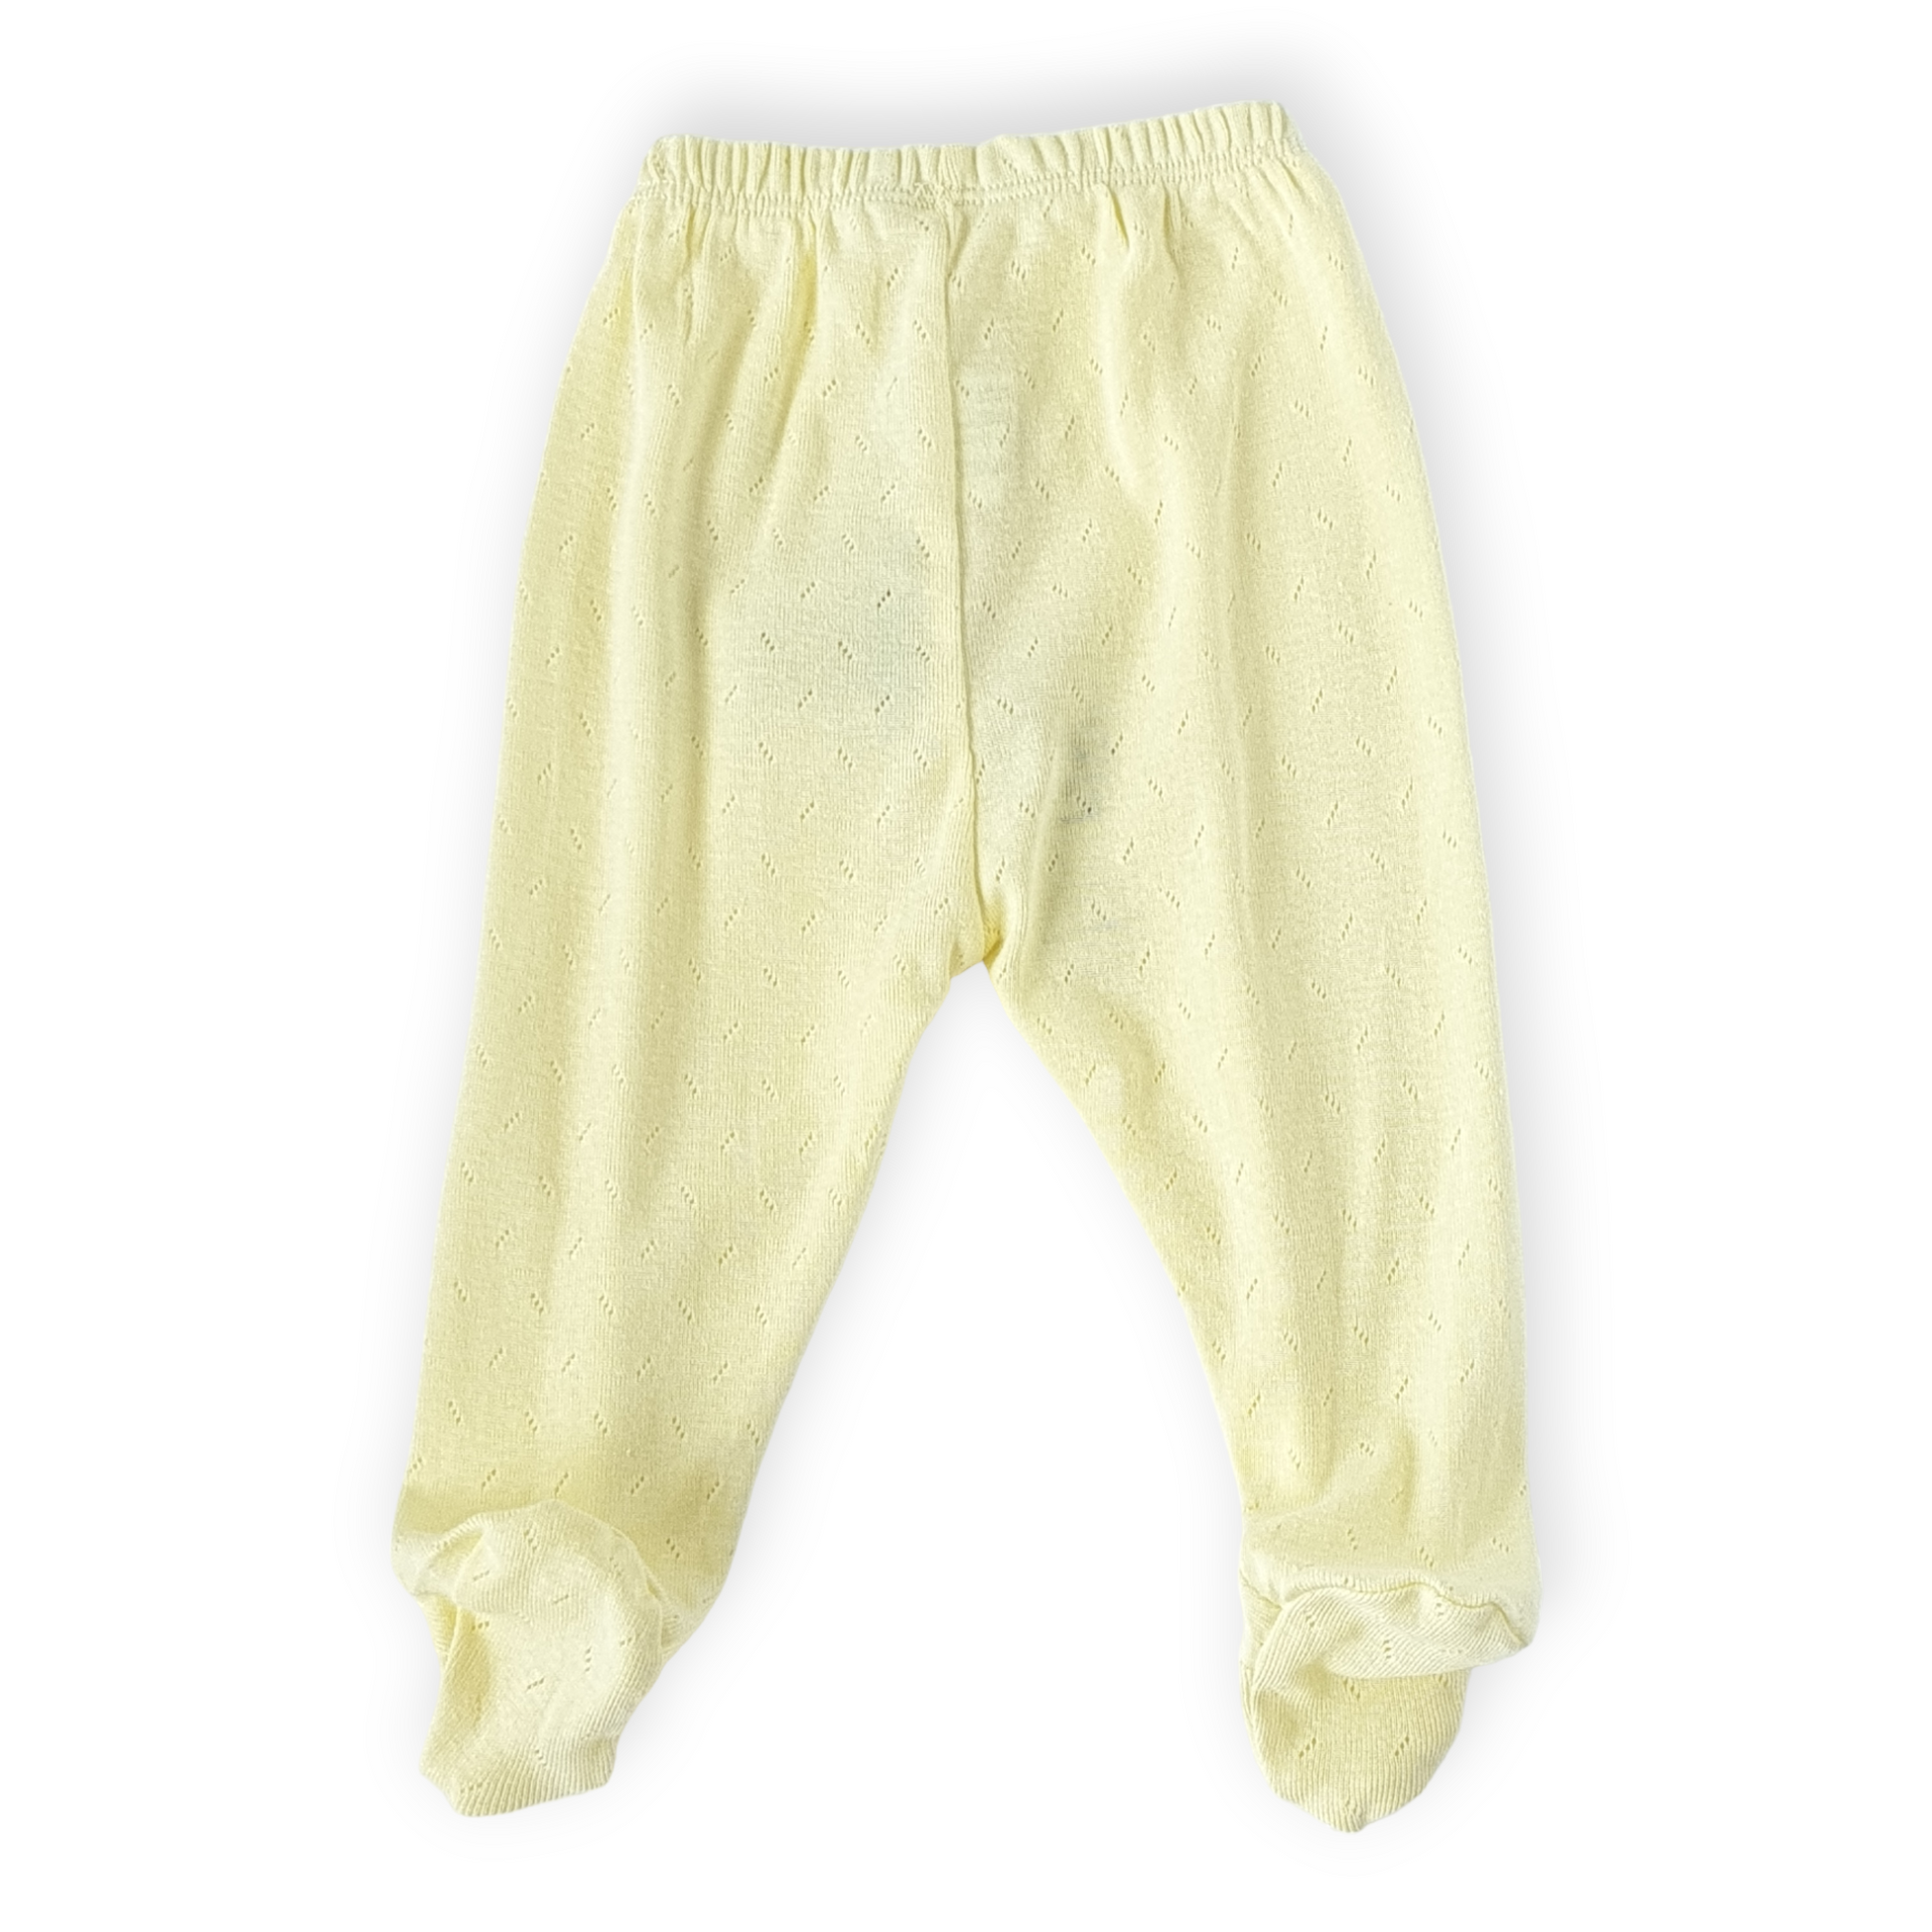 Basic Yellow Footed Pants with Animals-Animals, Boy, Catboy, Catgirl, catpants, Footed pants, Girl, Pants, SS23, Unisex, Yellow-BiBaby-[Too Twee]-[Tootwee]-[baby]-[newborn]-[clothes]-[essentials]-[toys]-[Lebanon]